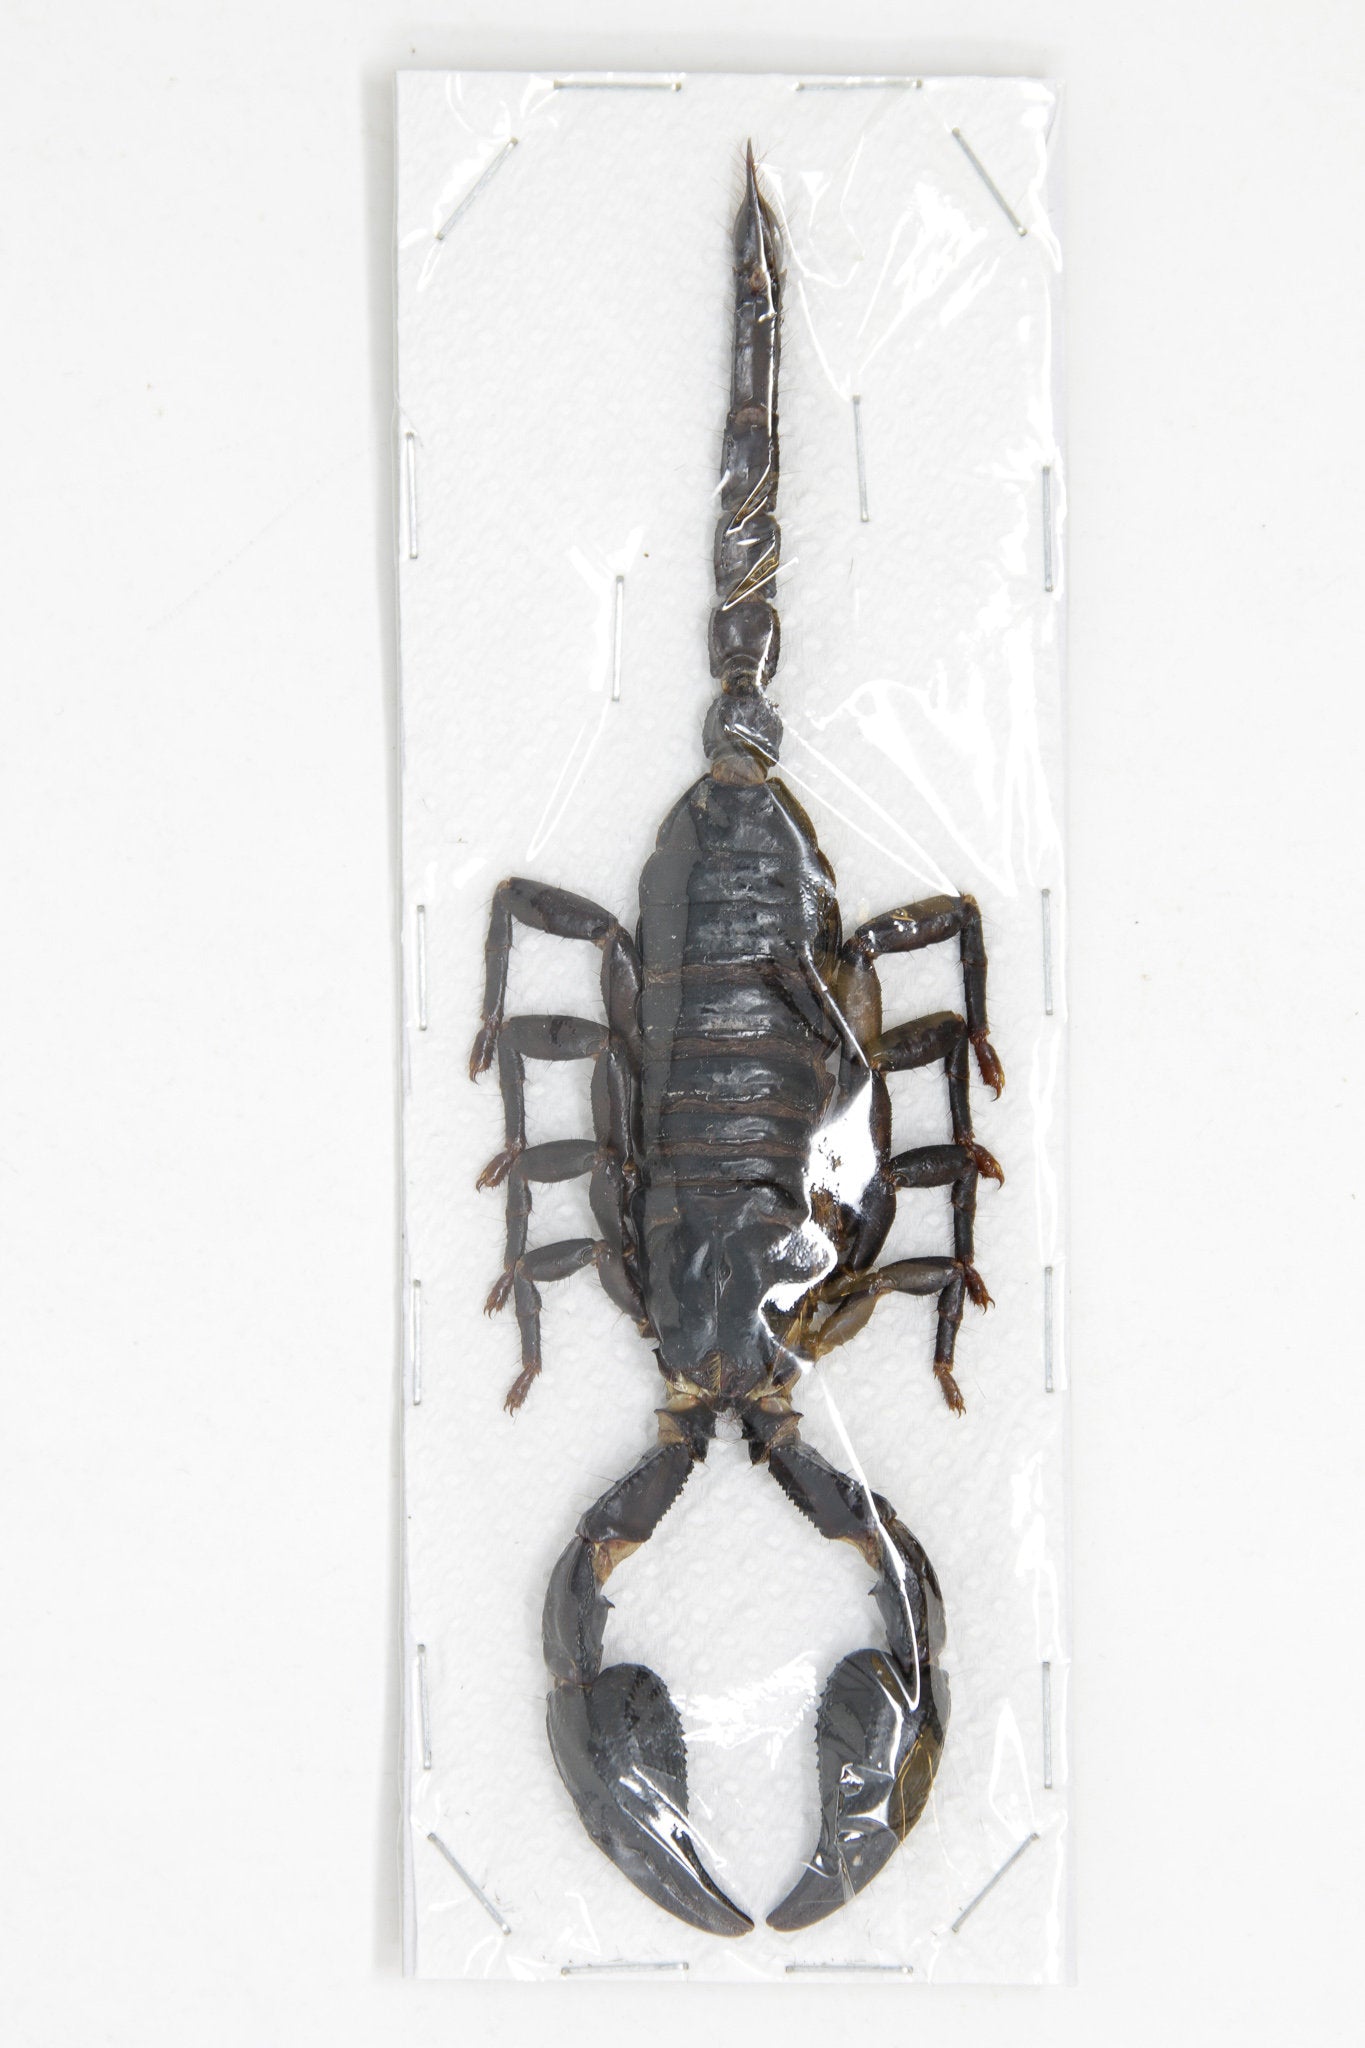 10 x Heterometrus spinifer | Giant Forest Scorpions +/- 120mm | A1 Unmounted Specimens